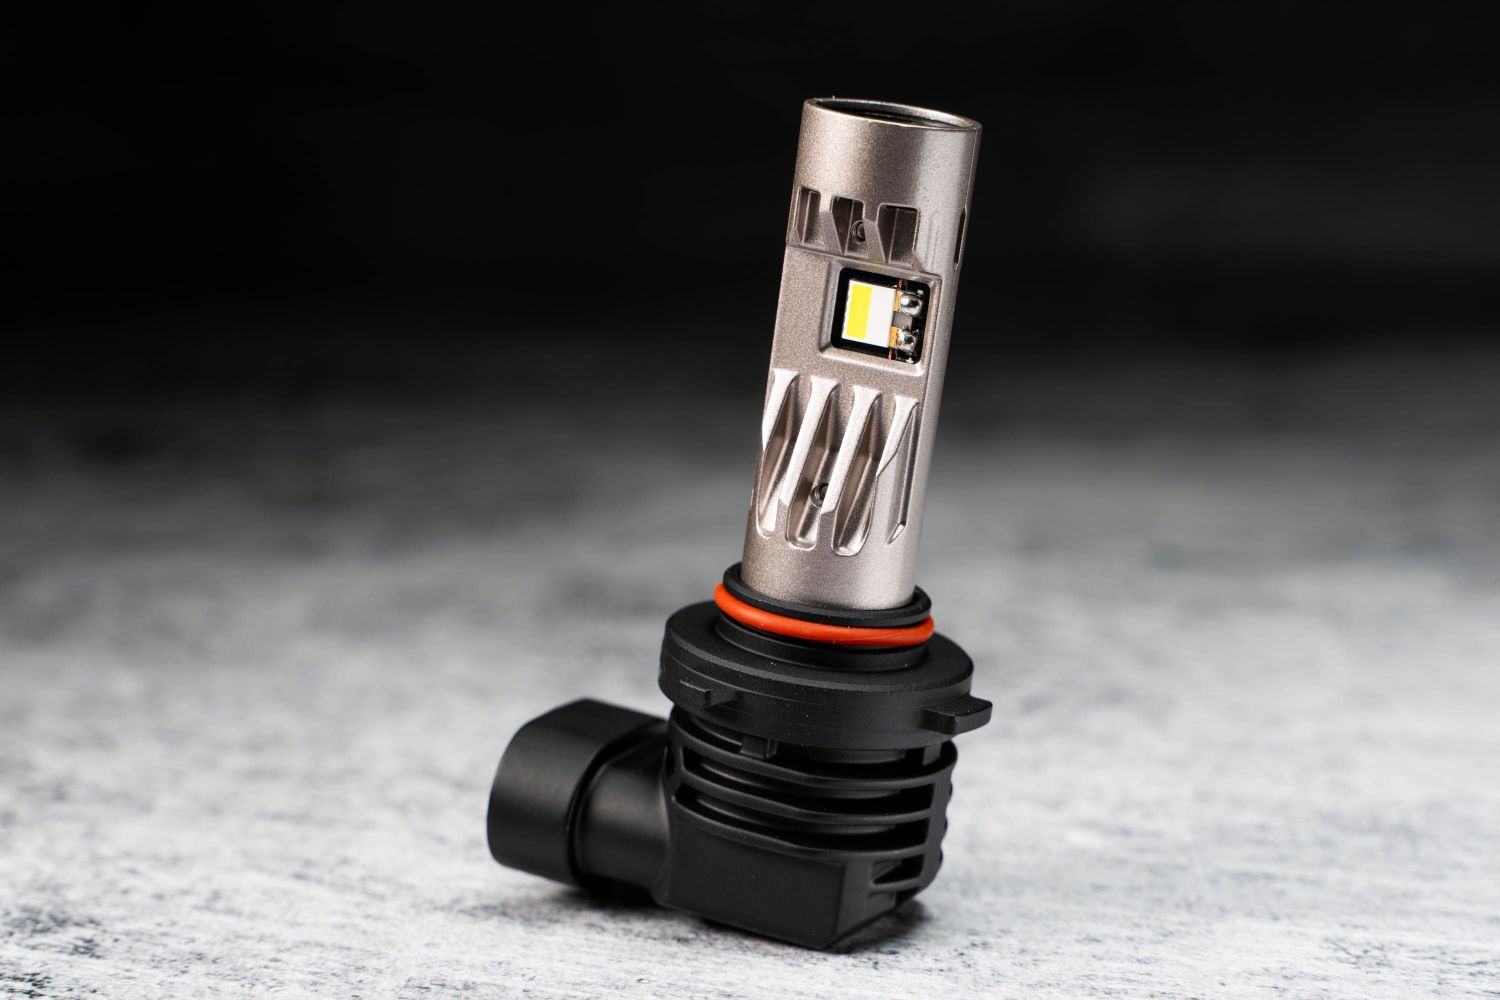 Introducing the New Diode Dynamics SL2 Pro LED Bulb